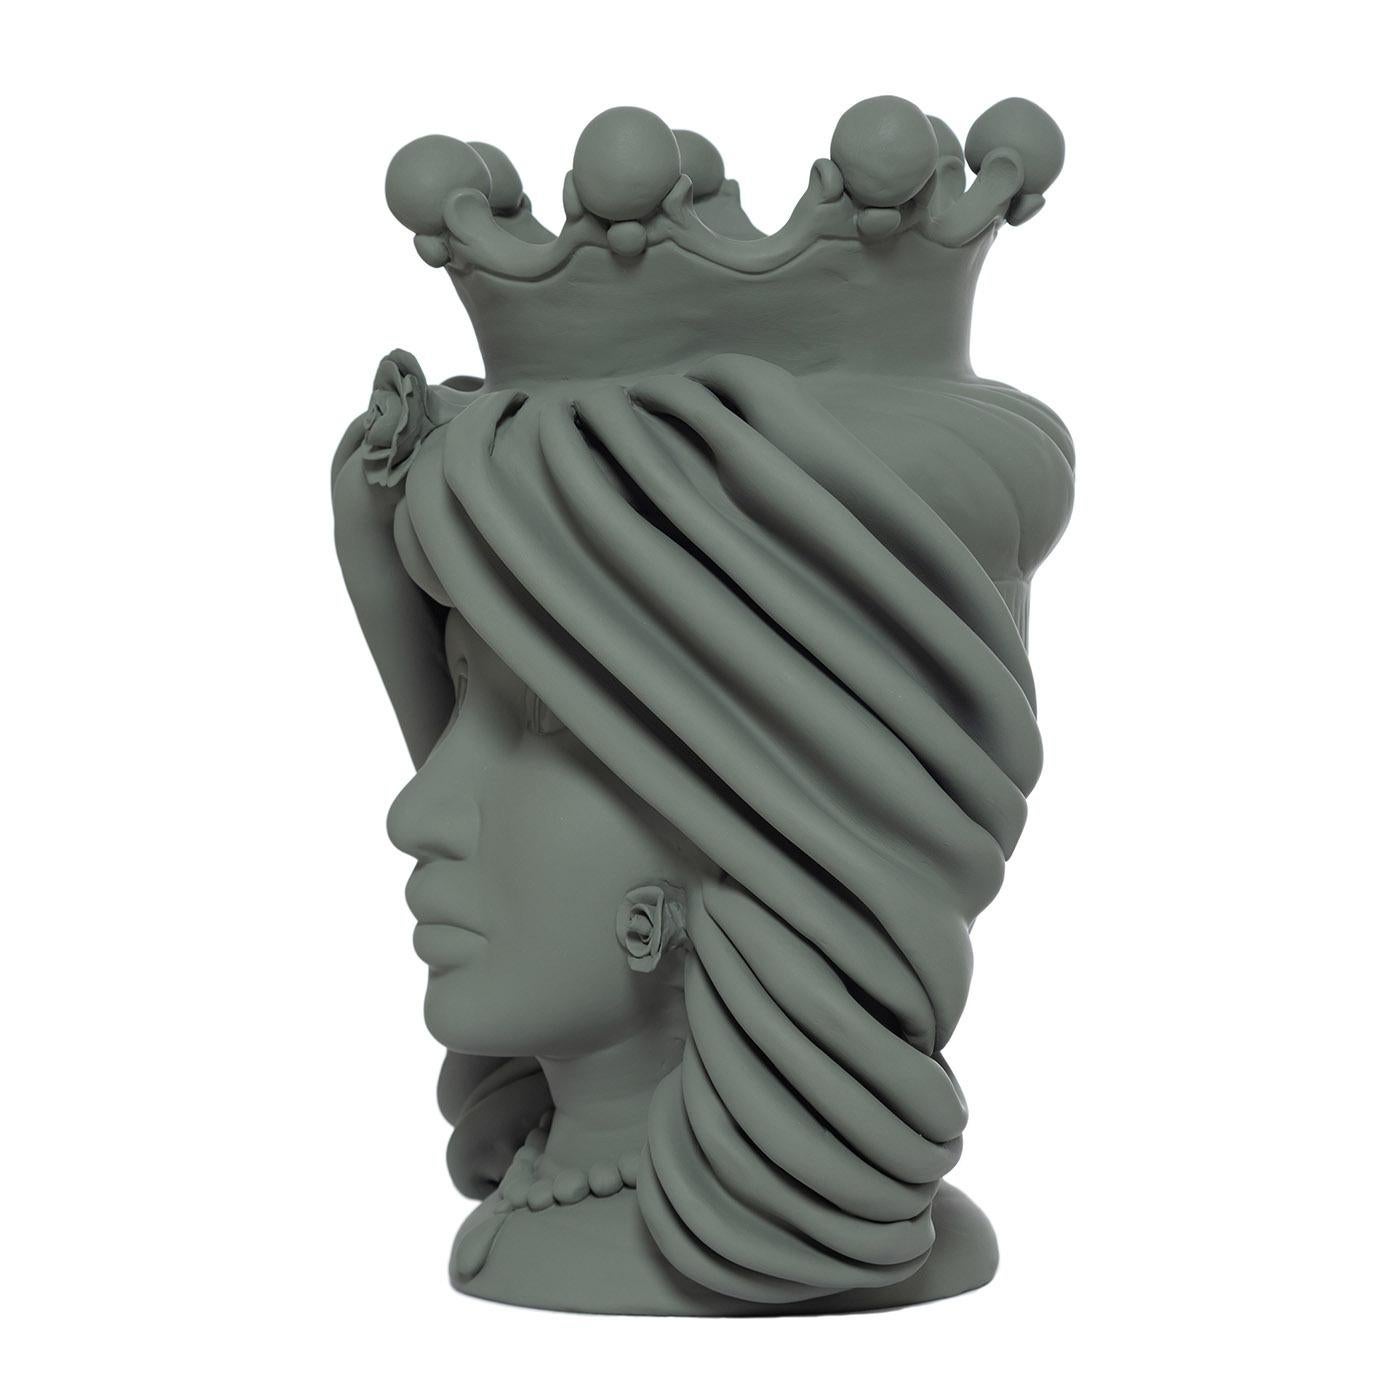 This hand-made vase is a contemporary interpretation of the Sicilian Moore woman, an iconic artistic production of the island. Entirely handmade in clay, this anthropomorphic vase has a sage green matte monochromatic finish. The face of the woman is